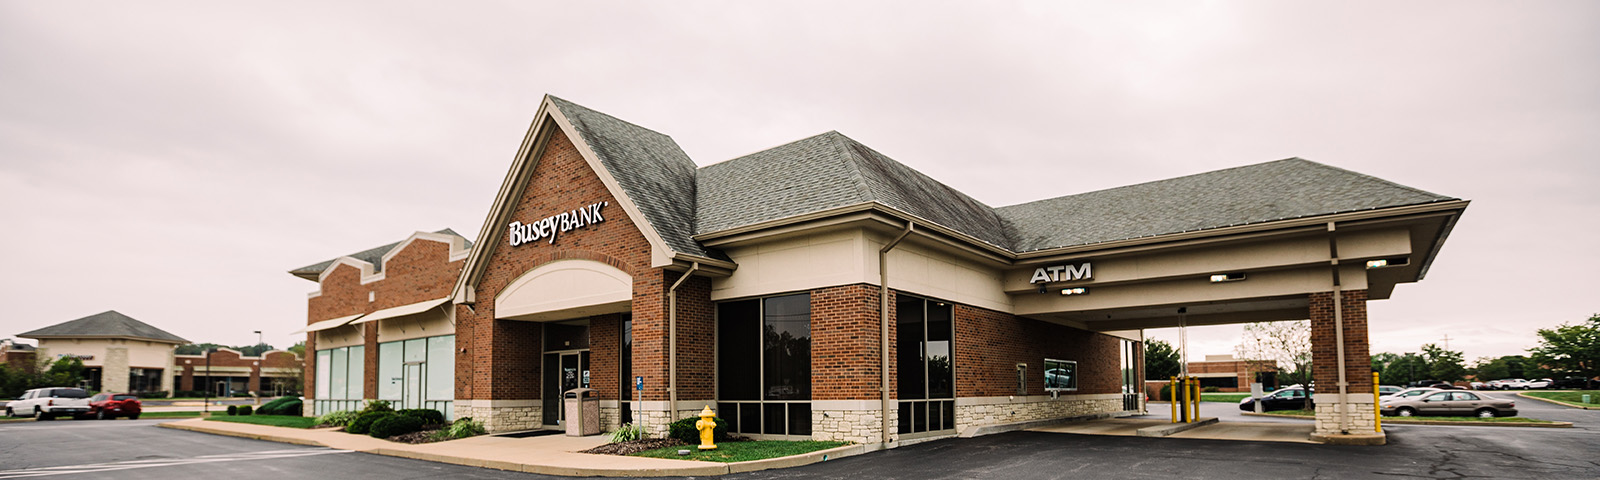 Busey Bank Chesterfield location